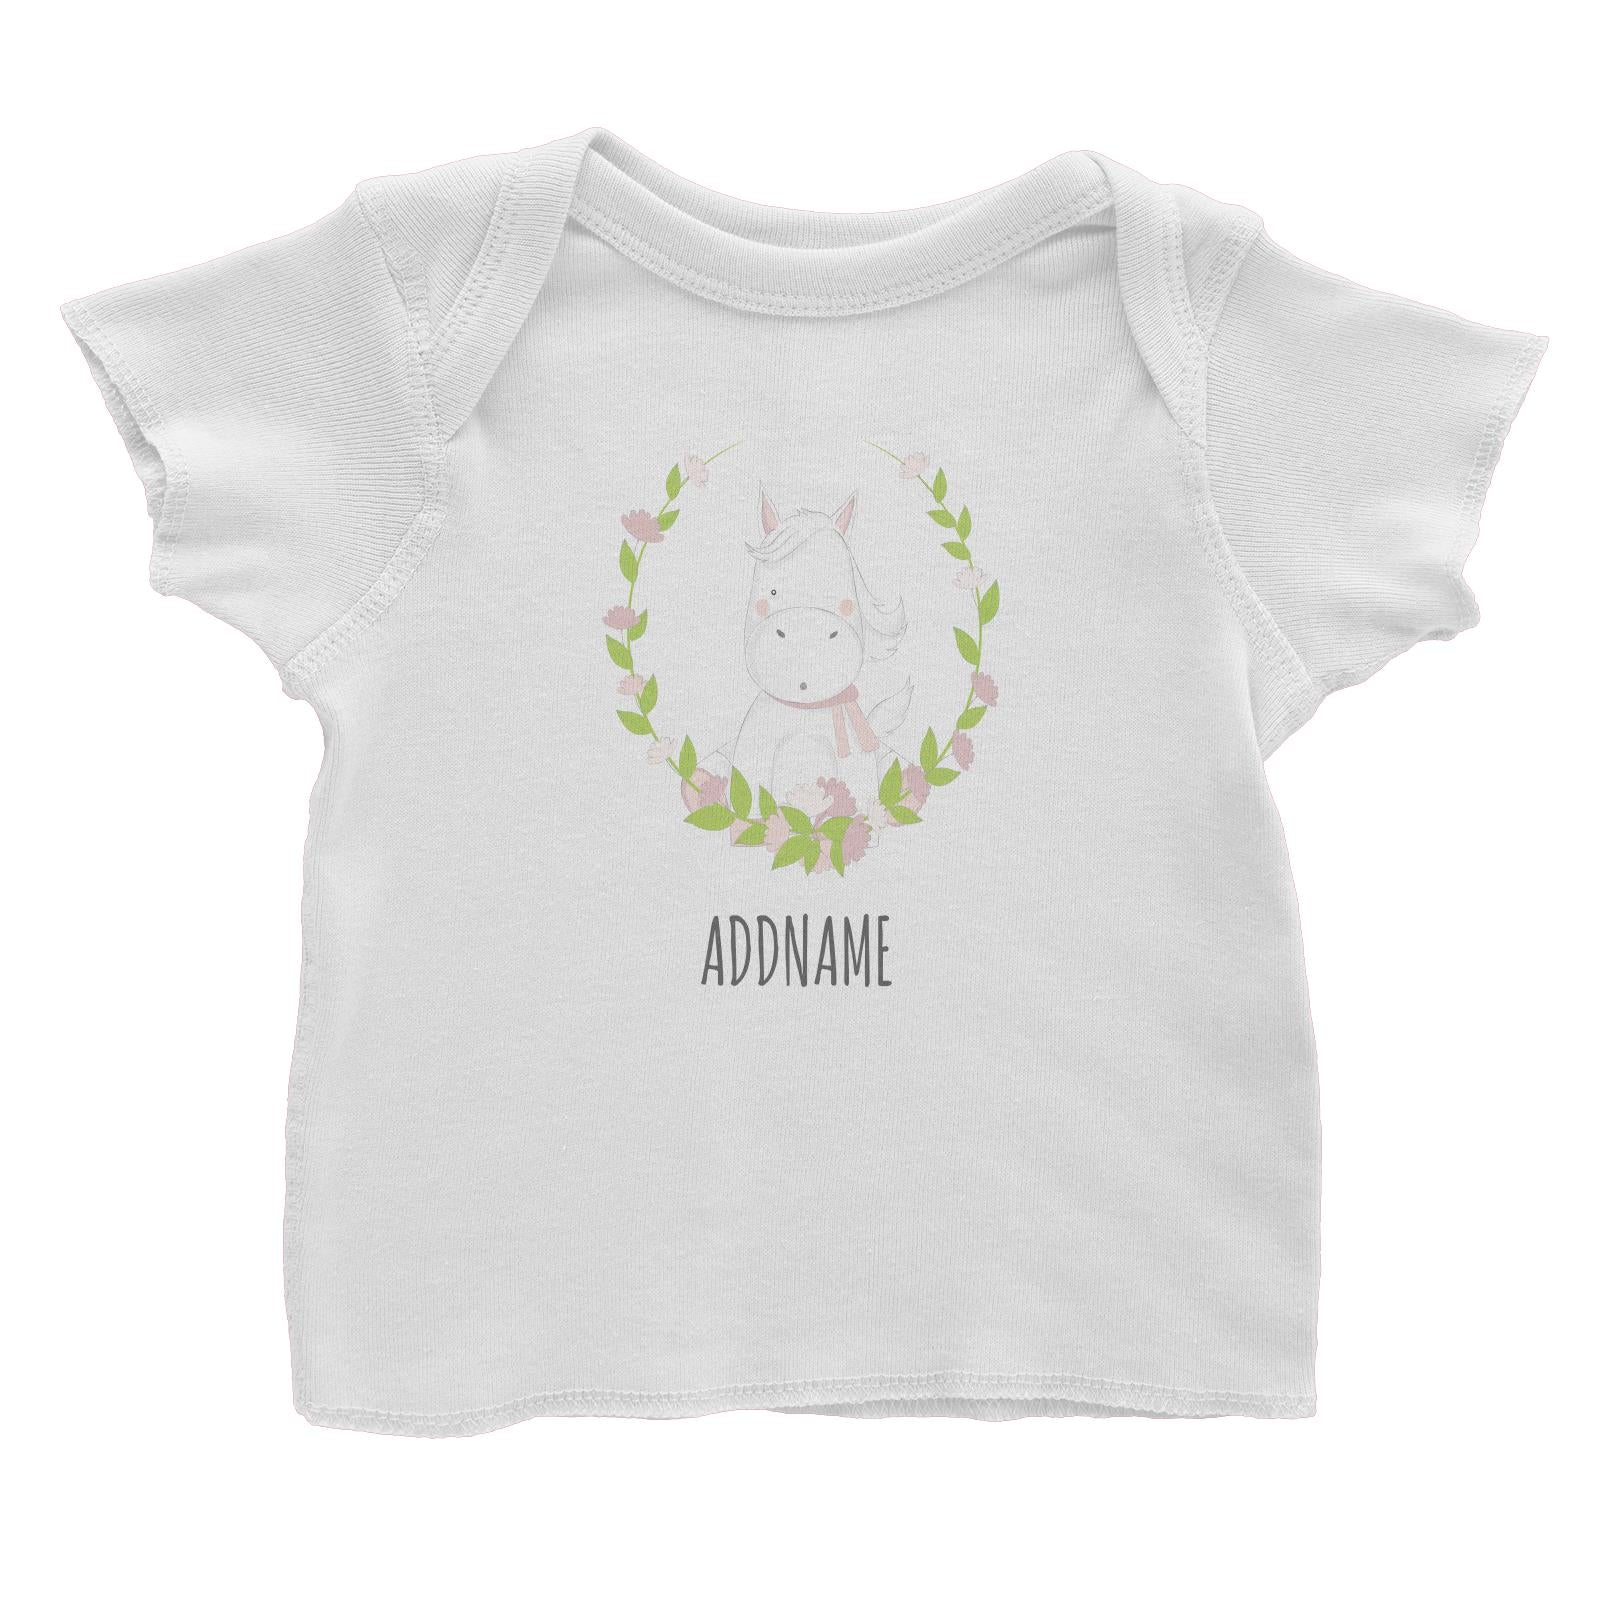 Sweet Wreath Horse Addname Baby T-Shirt